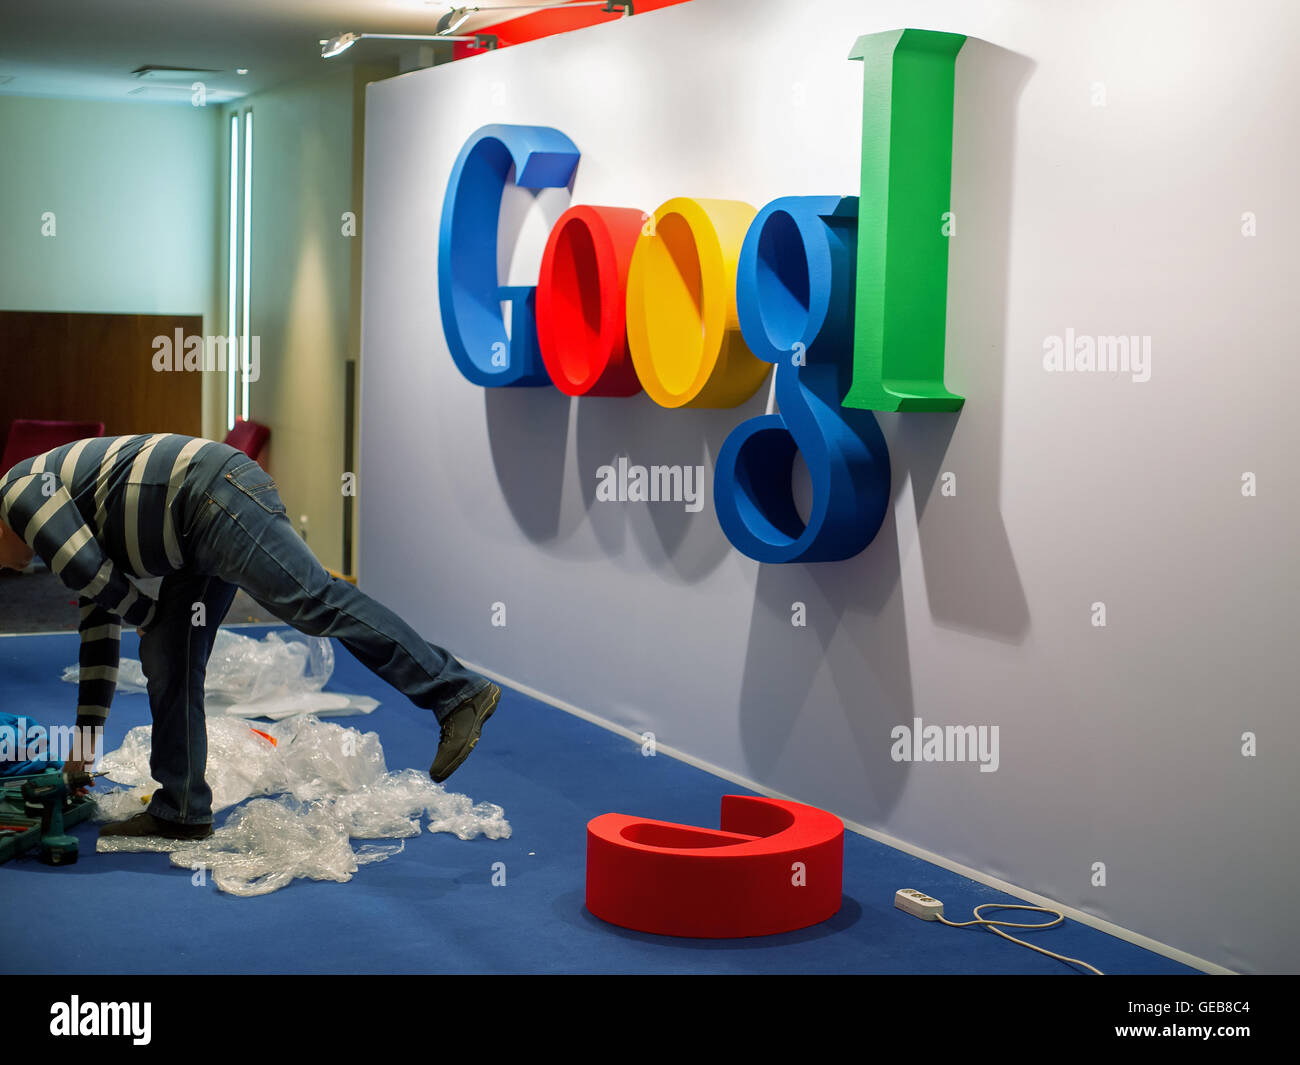 Installation of google logo for IT conference Stock Photo